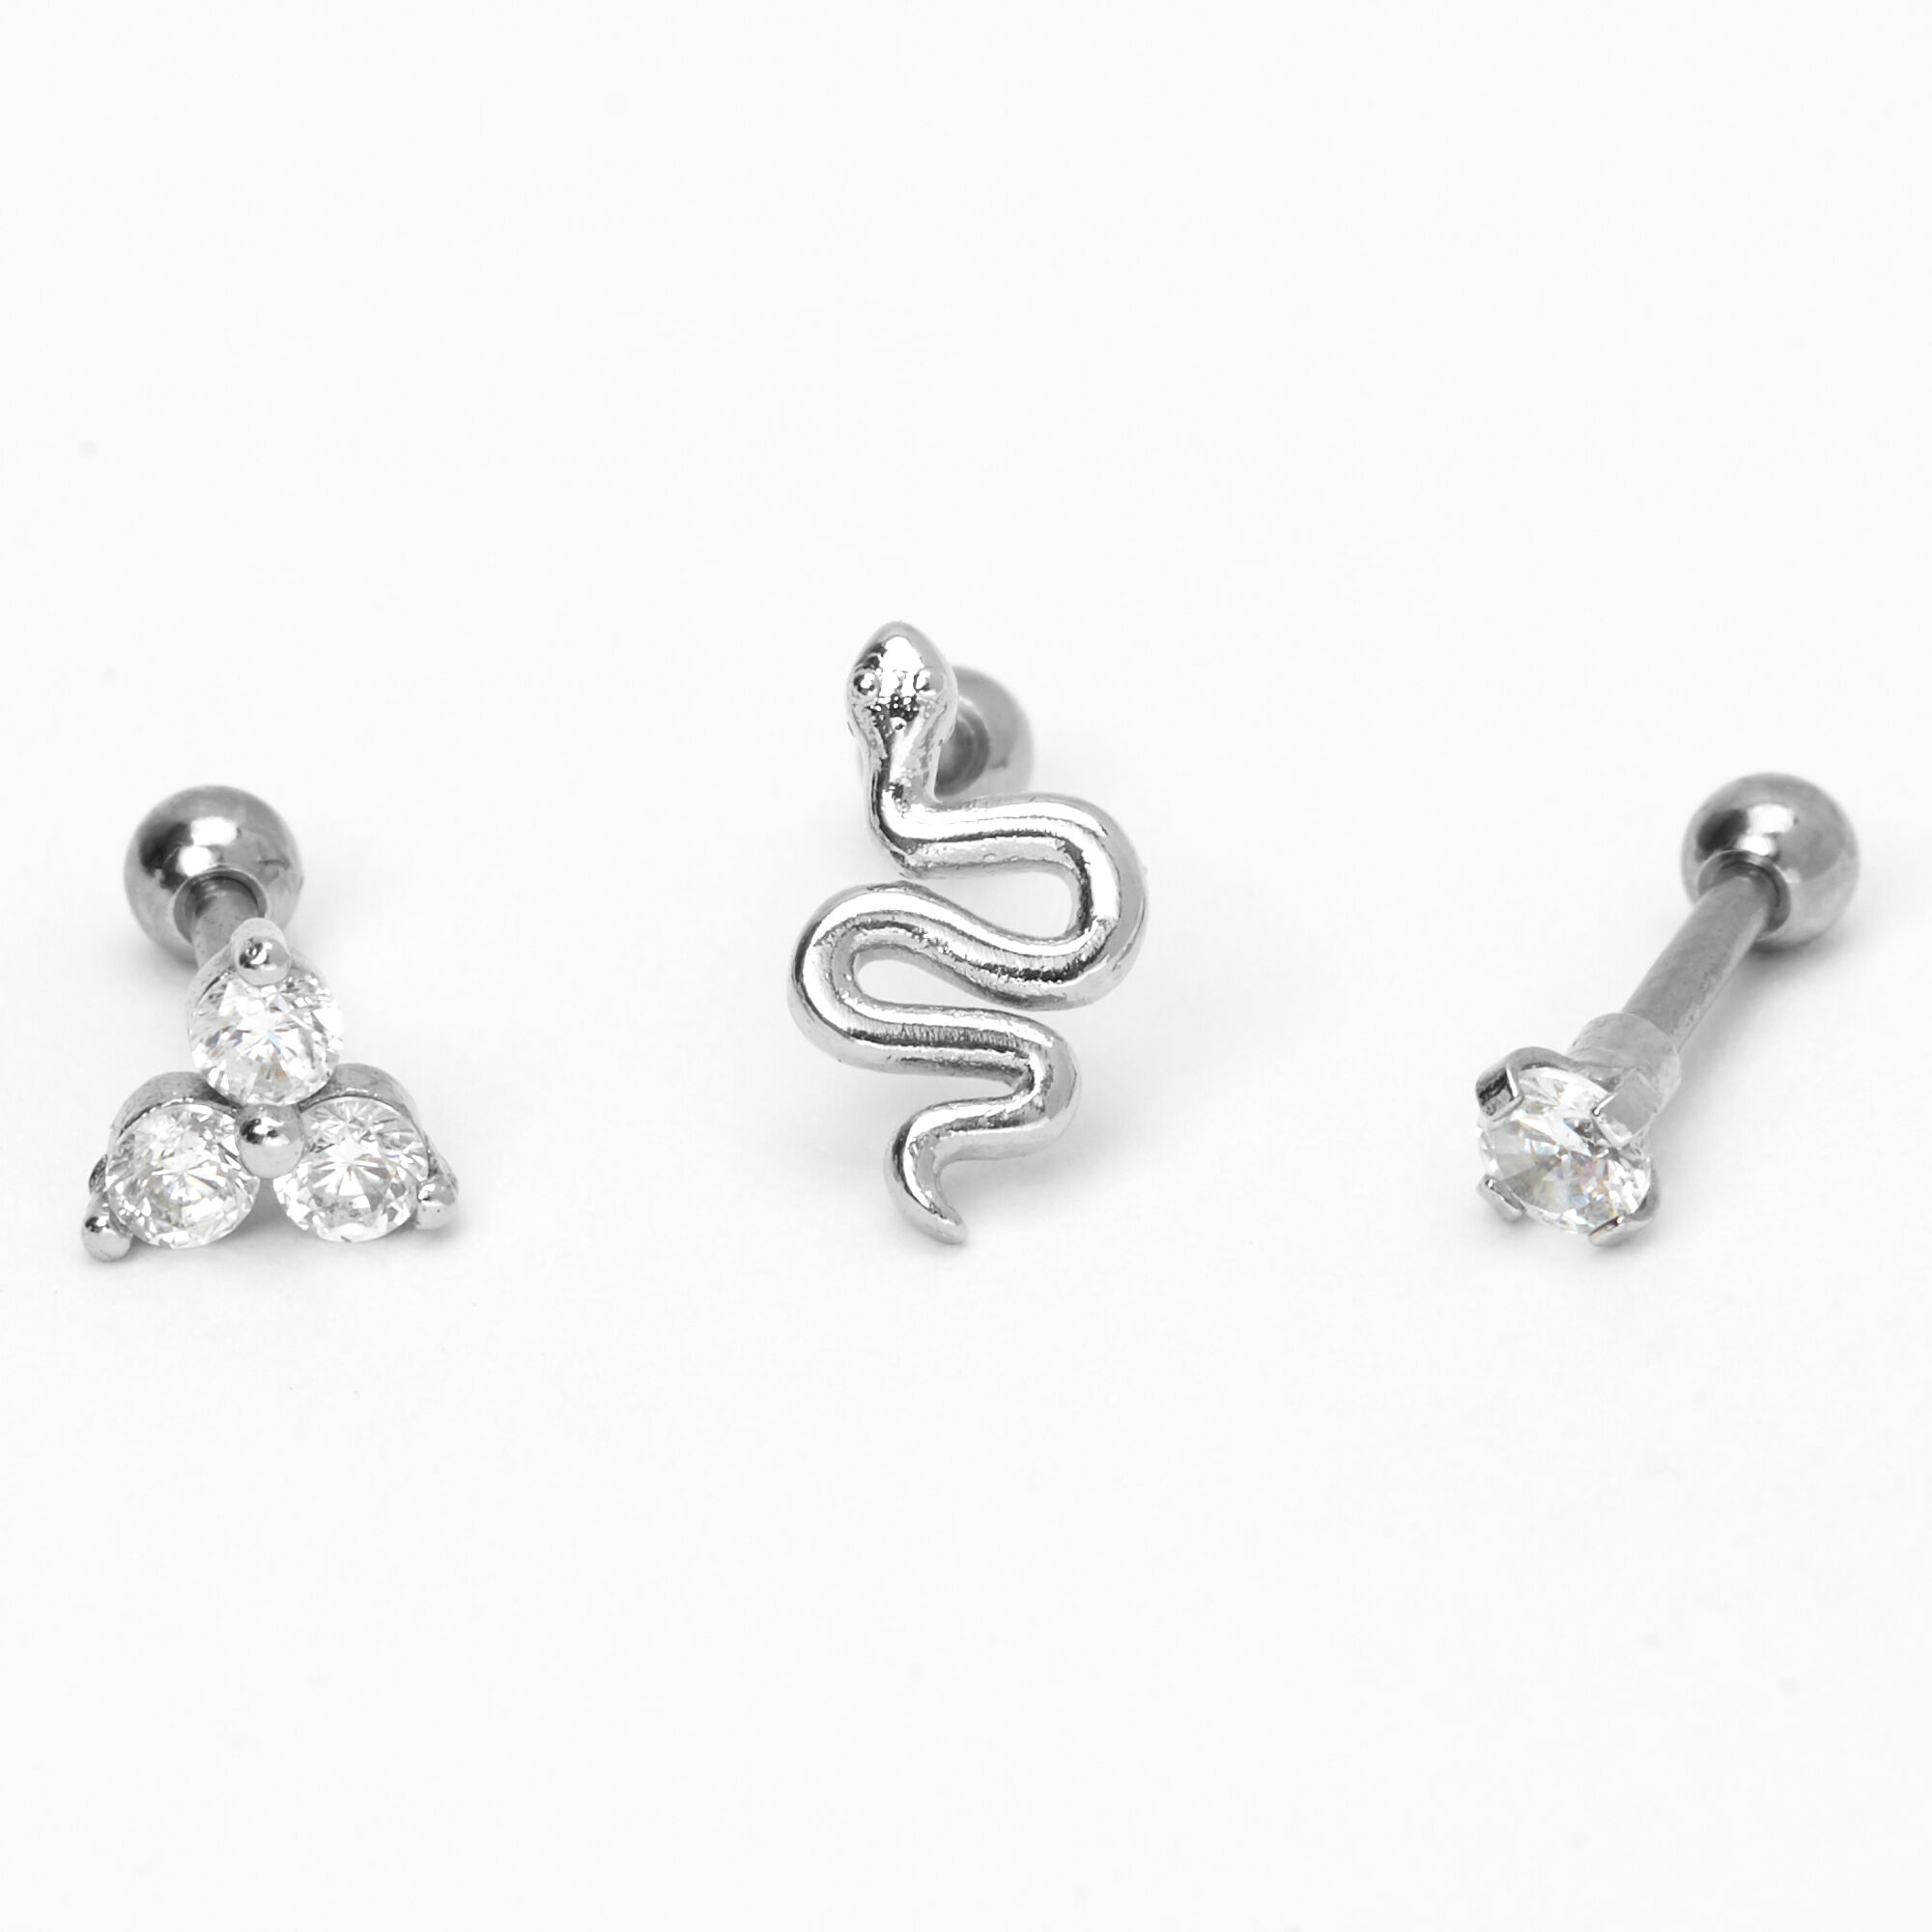 View Claires Tone 16G Embellished Snake Cartilage Earrings 3 Pack Silver information